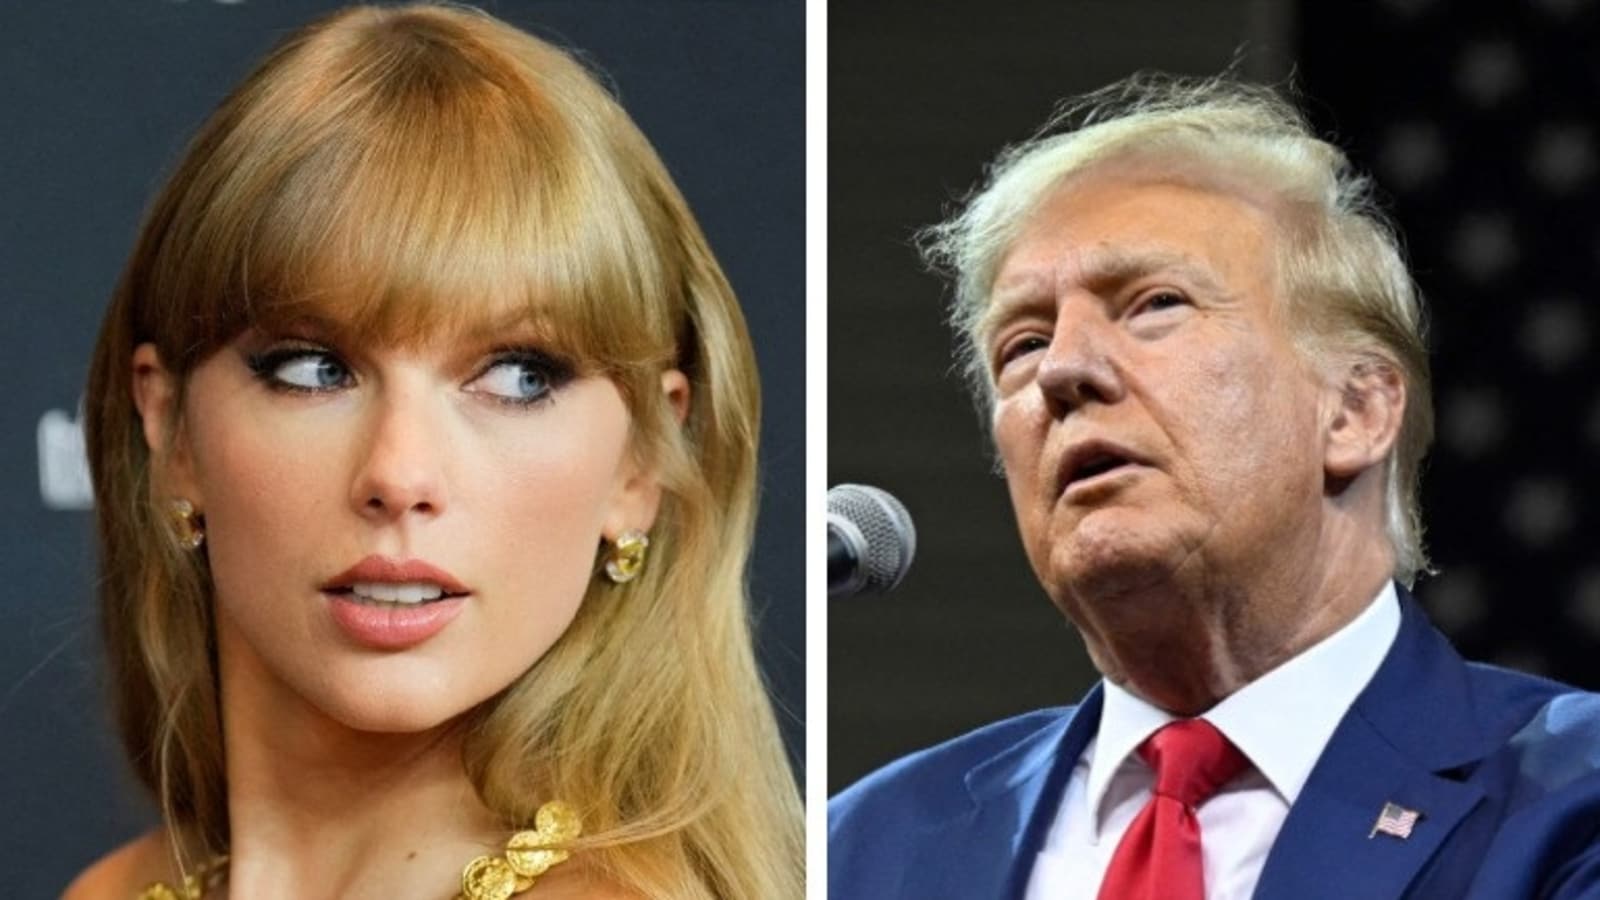 Donald Trump calls Taylor Swift ‘very beautiful’ but says she's also…